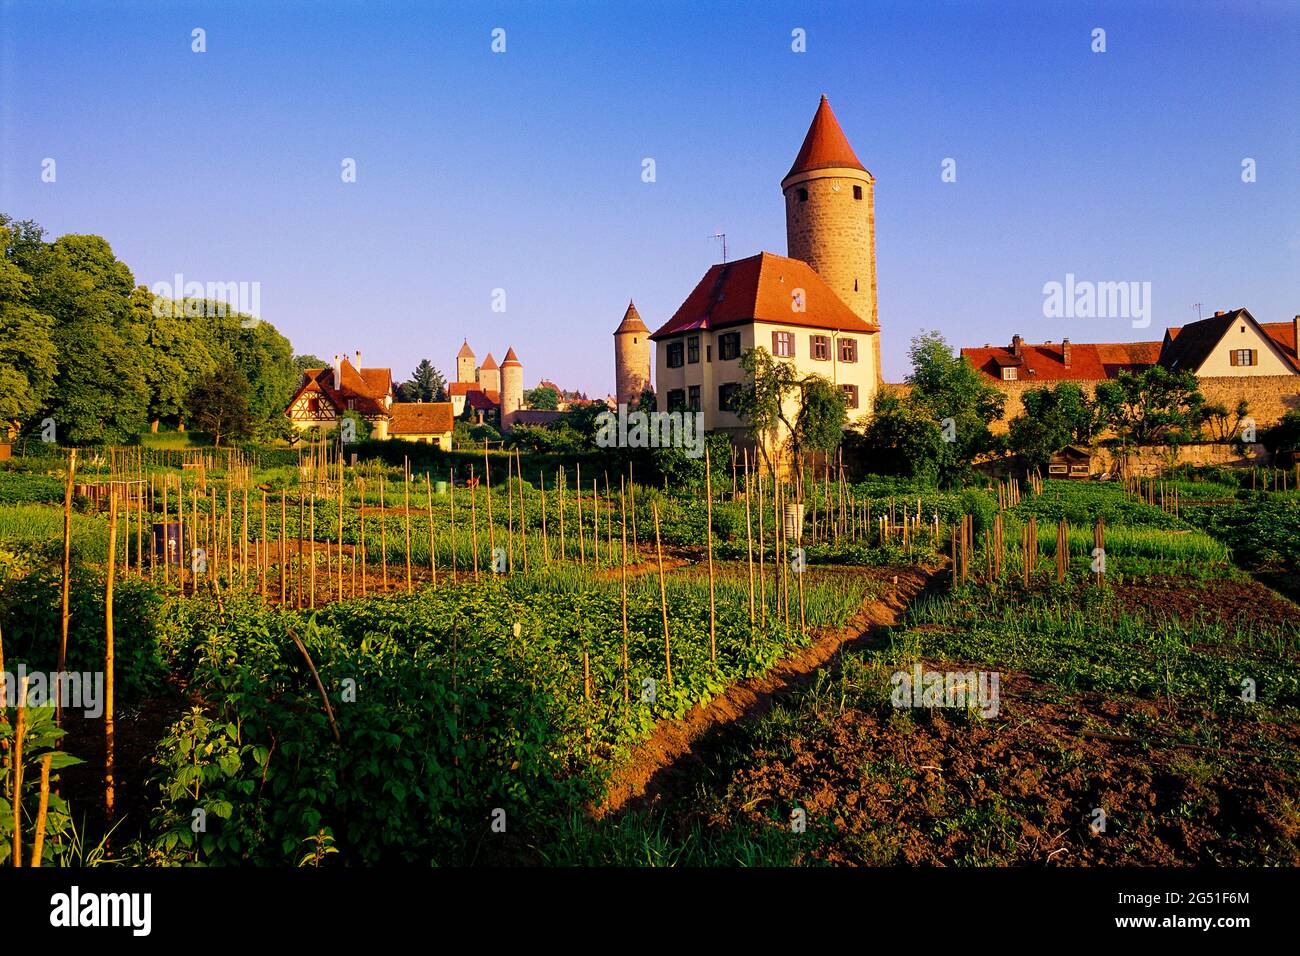 Vegetable garden and buildings in small town of Dinkelsbuhl, Bavaria, Germany Stock Photo